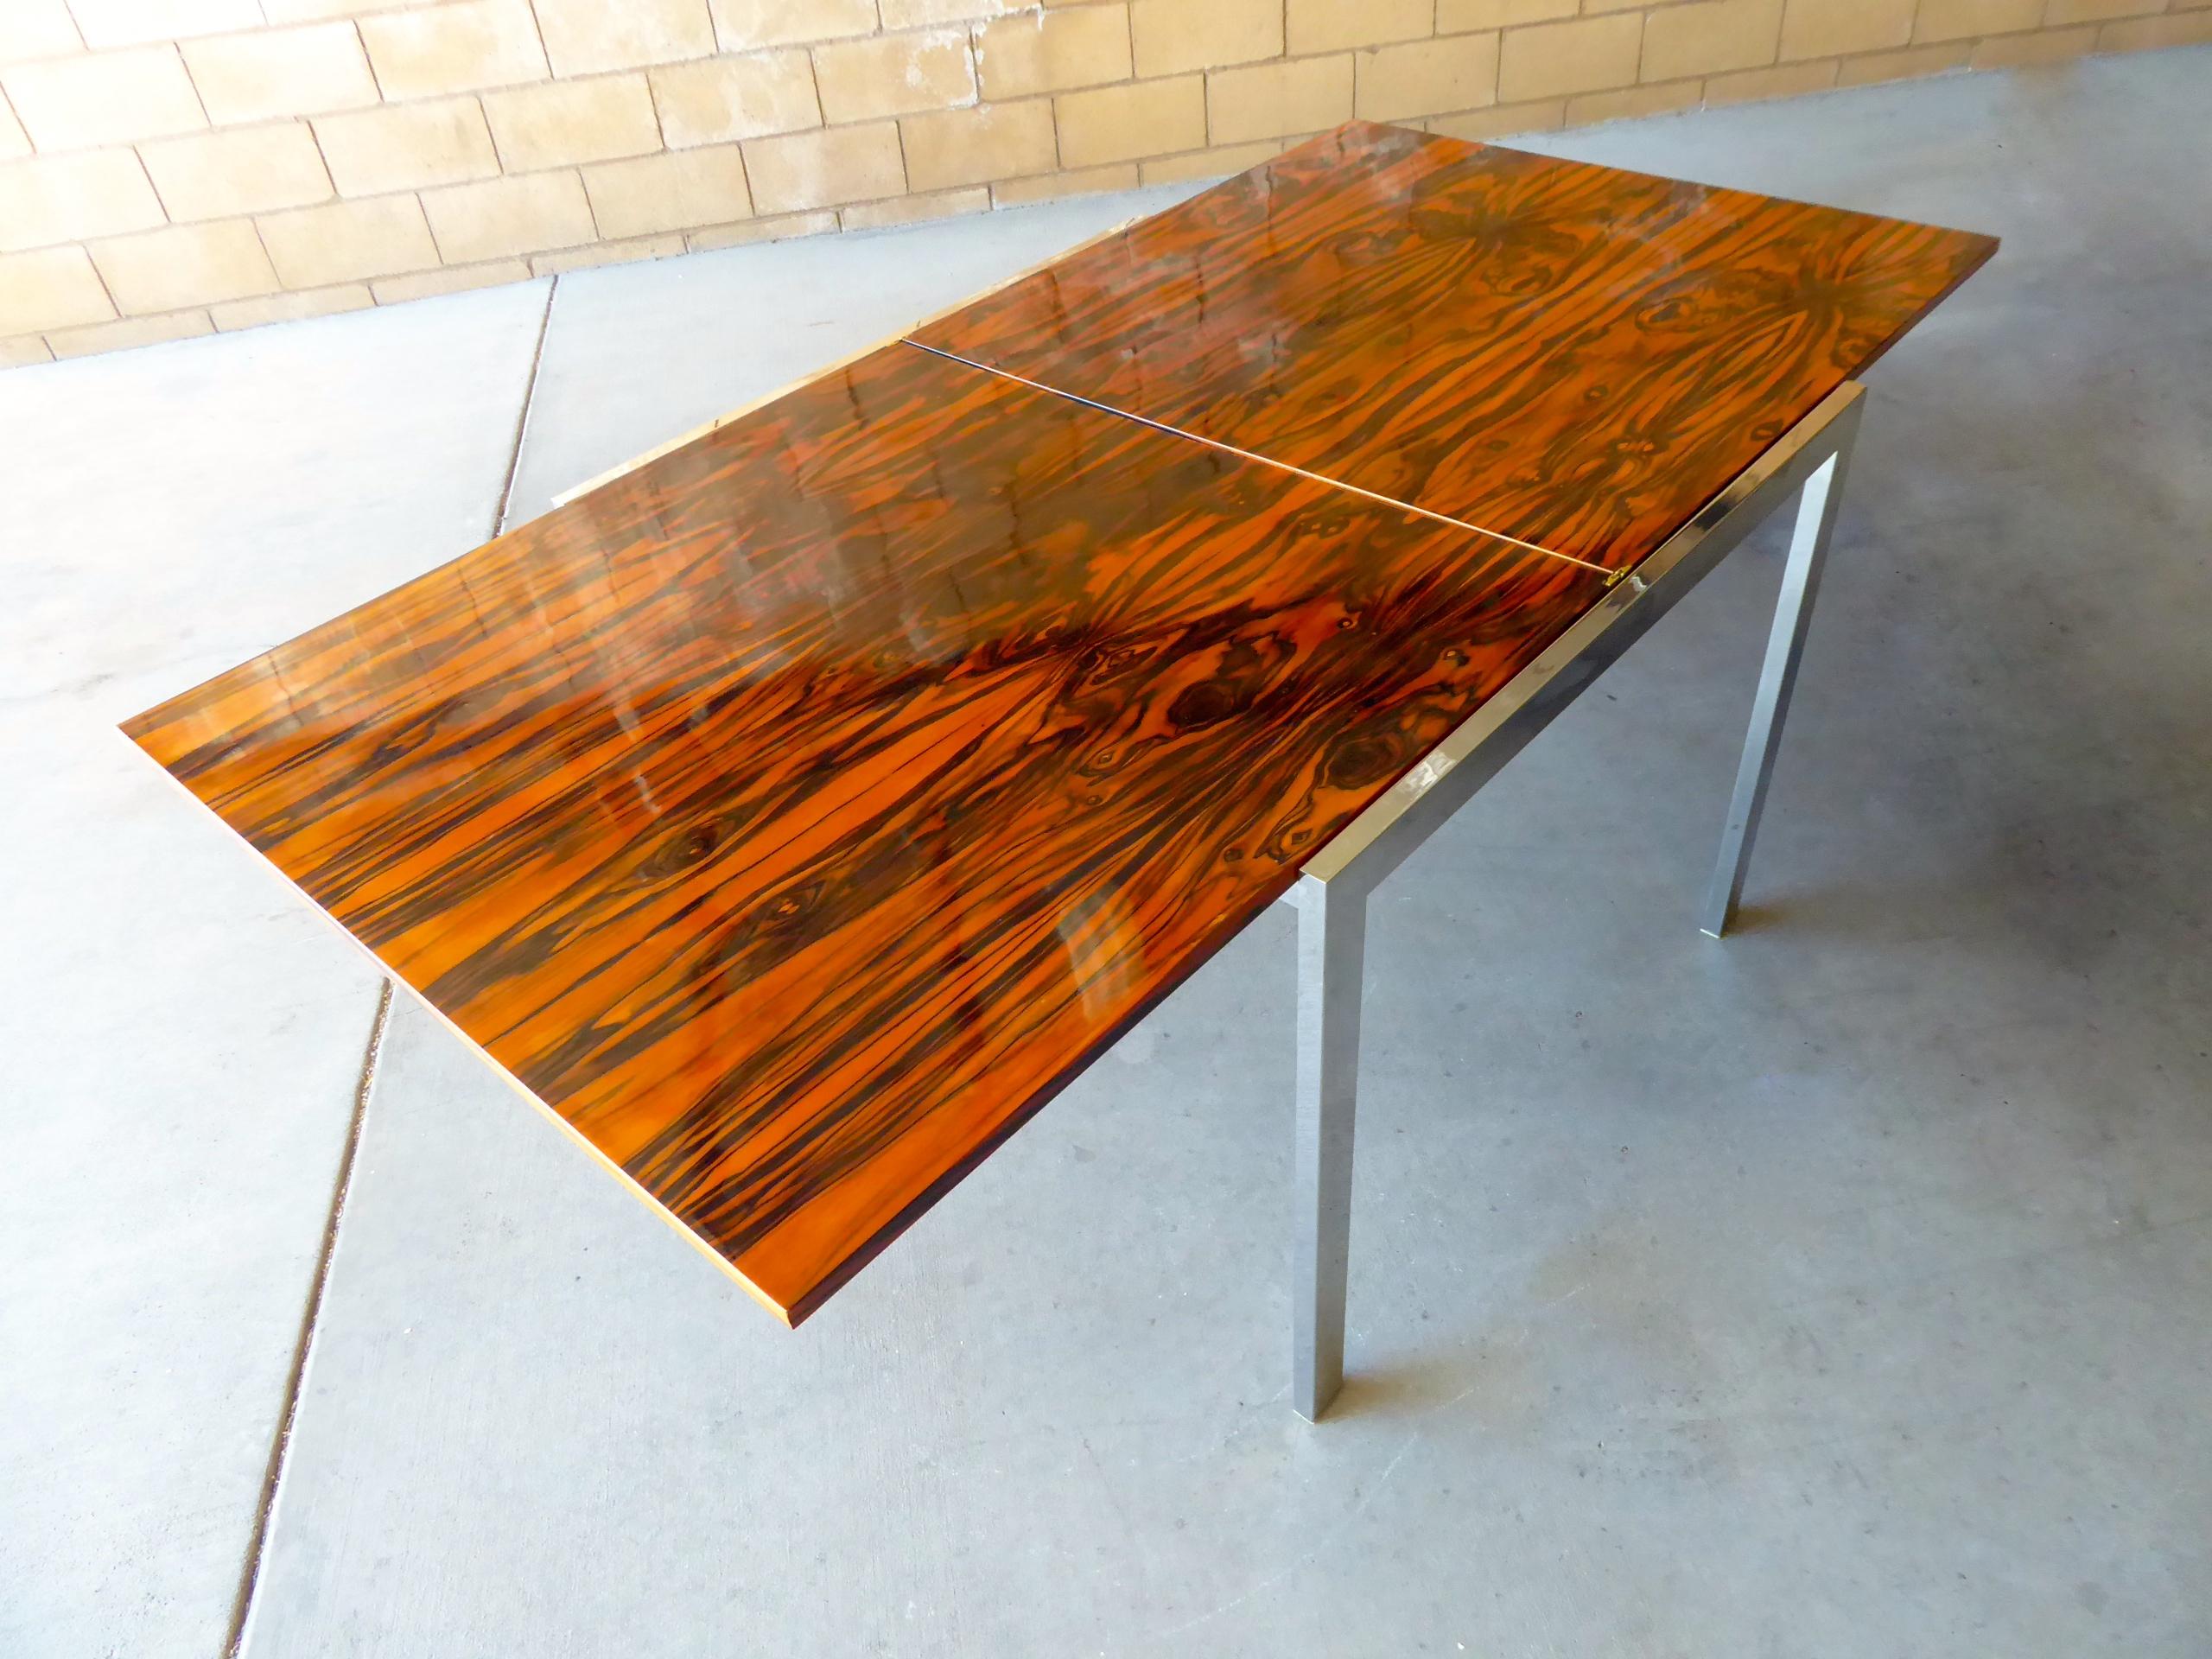 A 1960s chrome-plated steel card table with a Macassar ebony flip-top in the style of Milo Baughman. The top slides within the metal framework and flips open to reveal a wildly grained Macassar ebony surface the will accommodate four to six people.